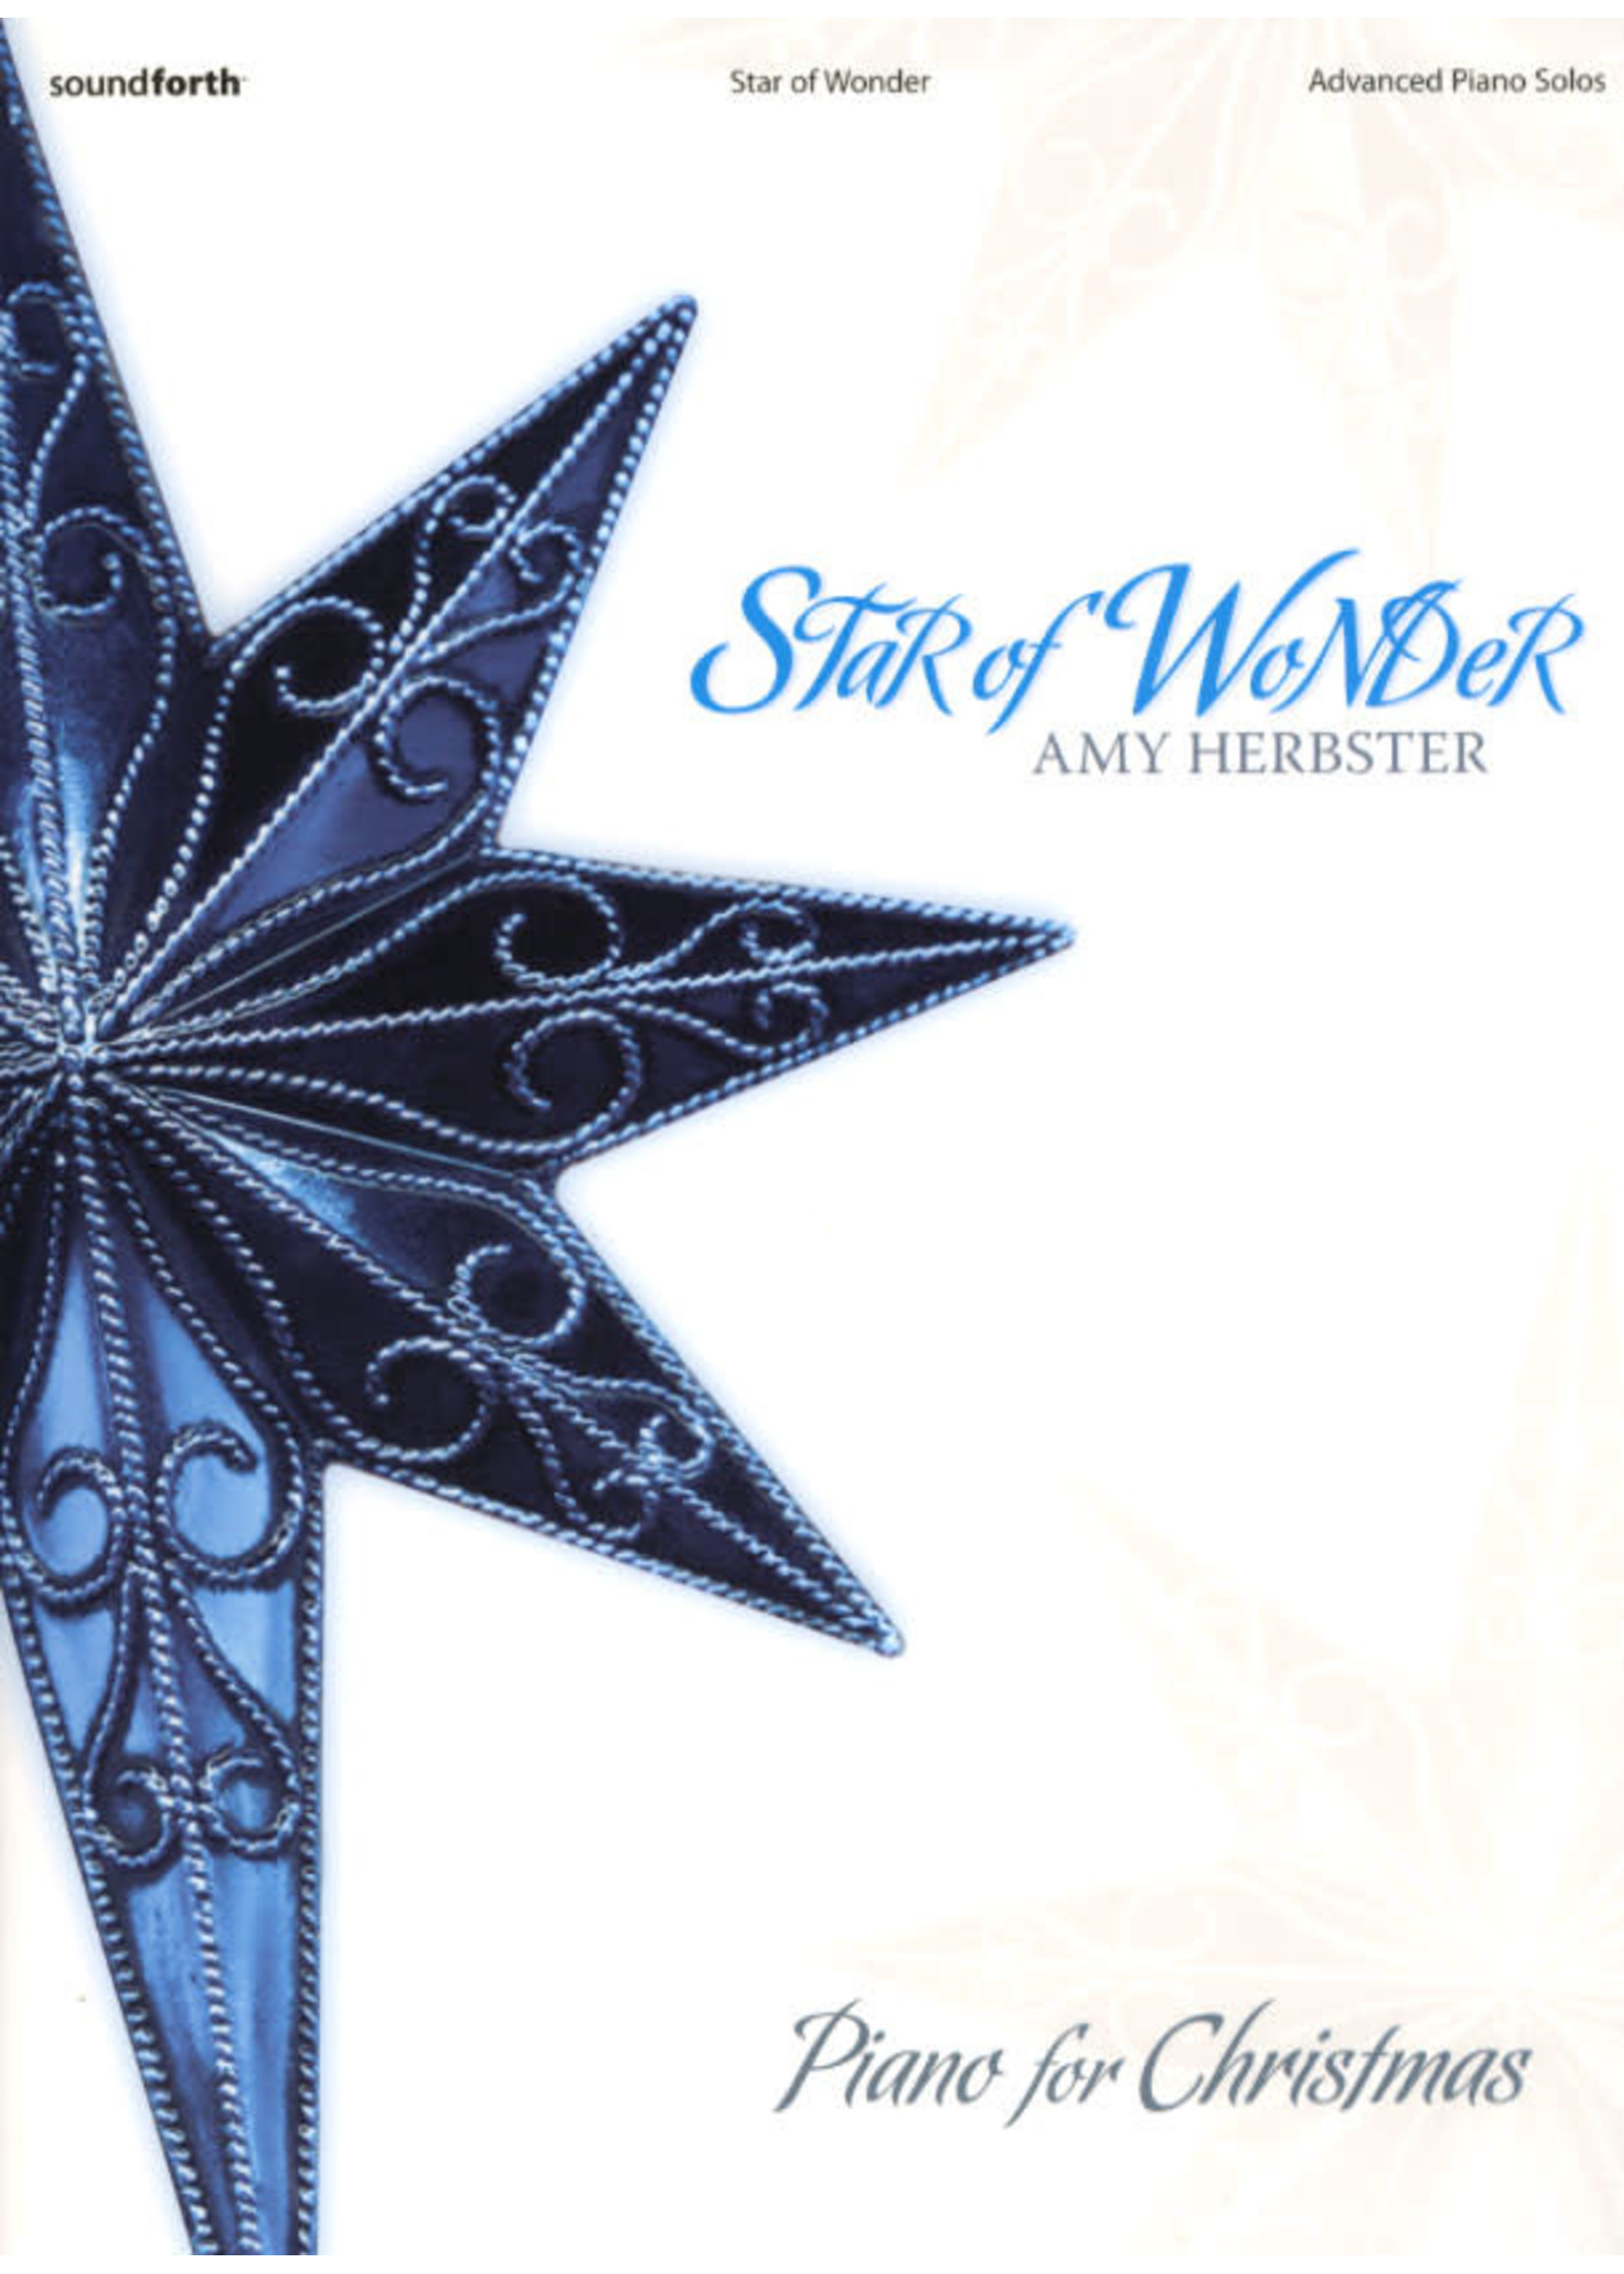 Star of Wonder (Advanced Piano Solos - Herbster)